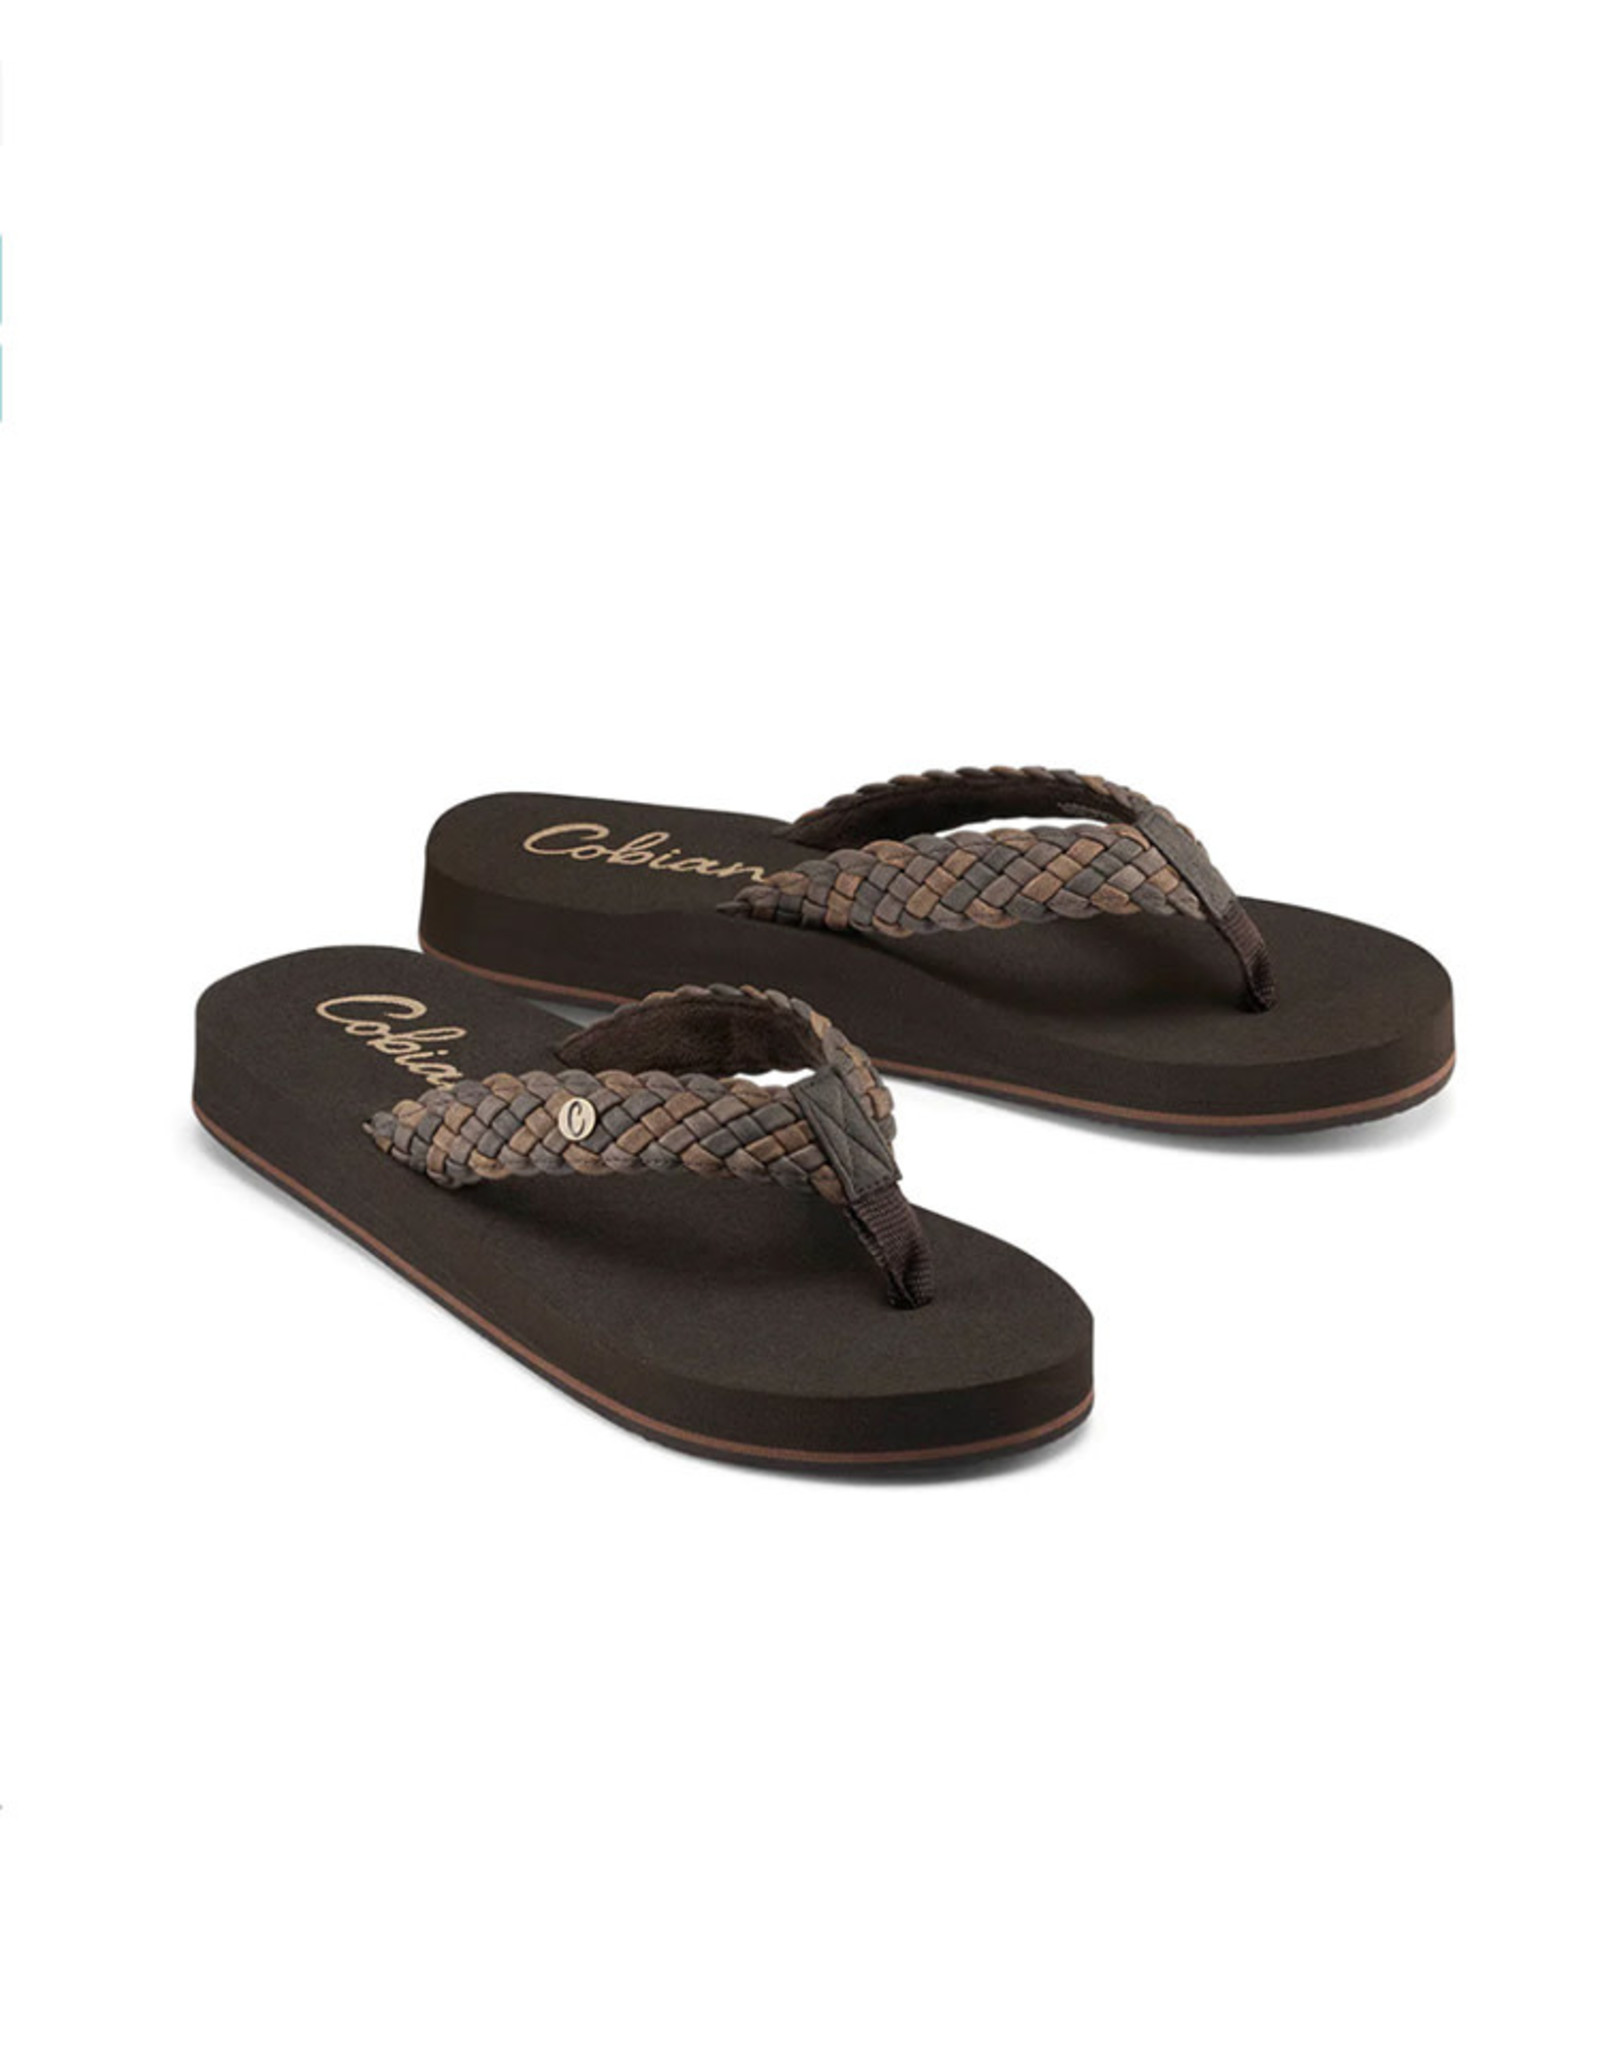 Cobian Cobian Braided Bounce Sandals Chocolate